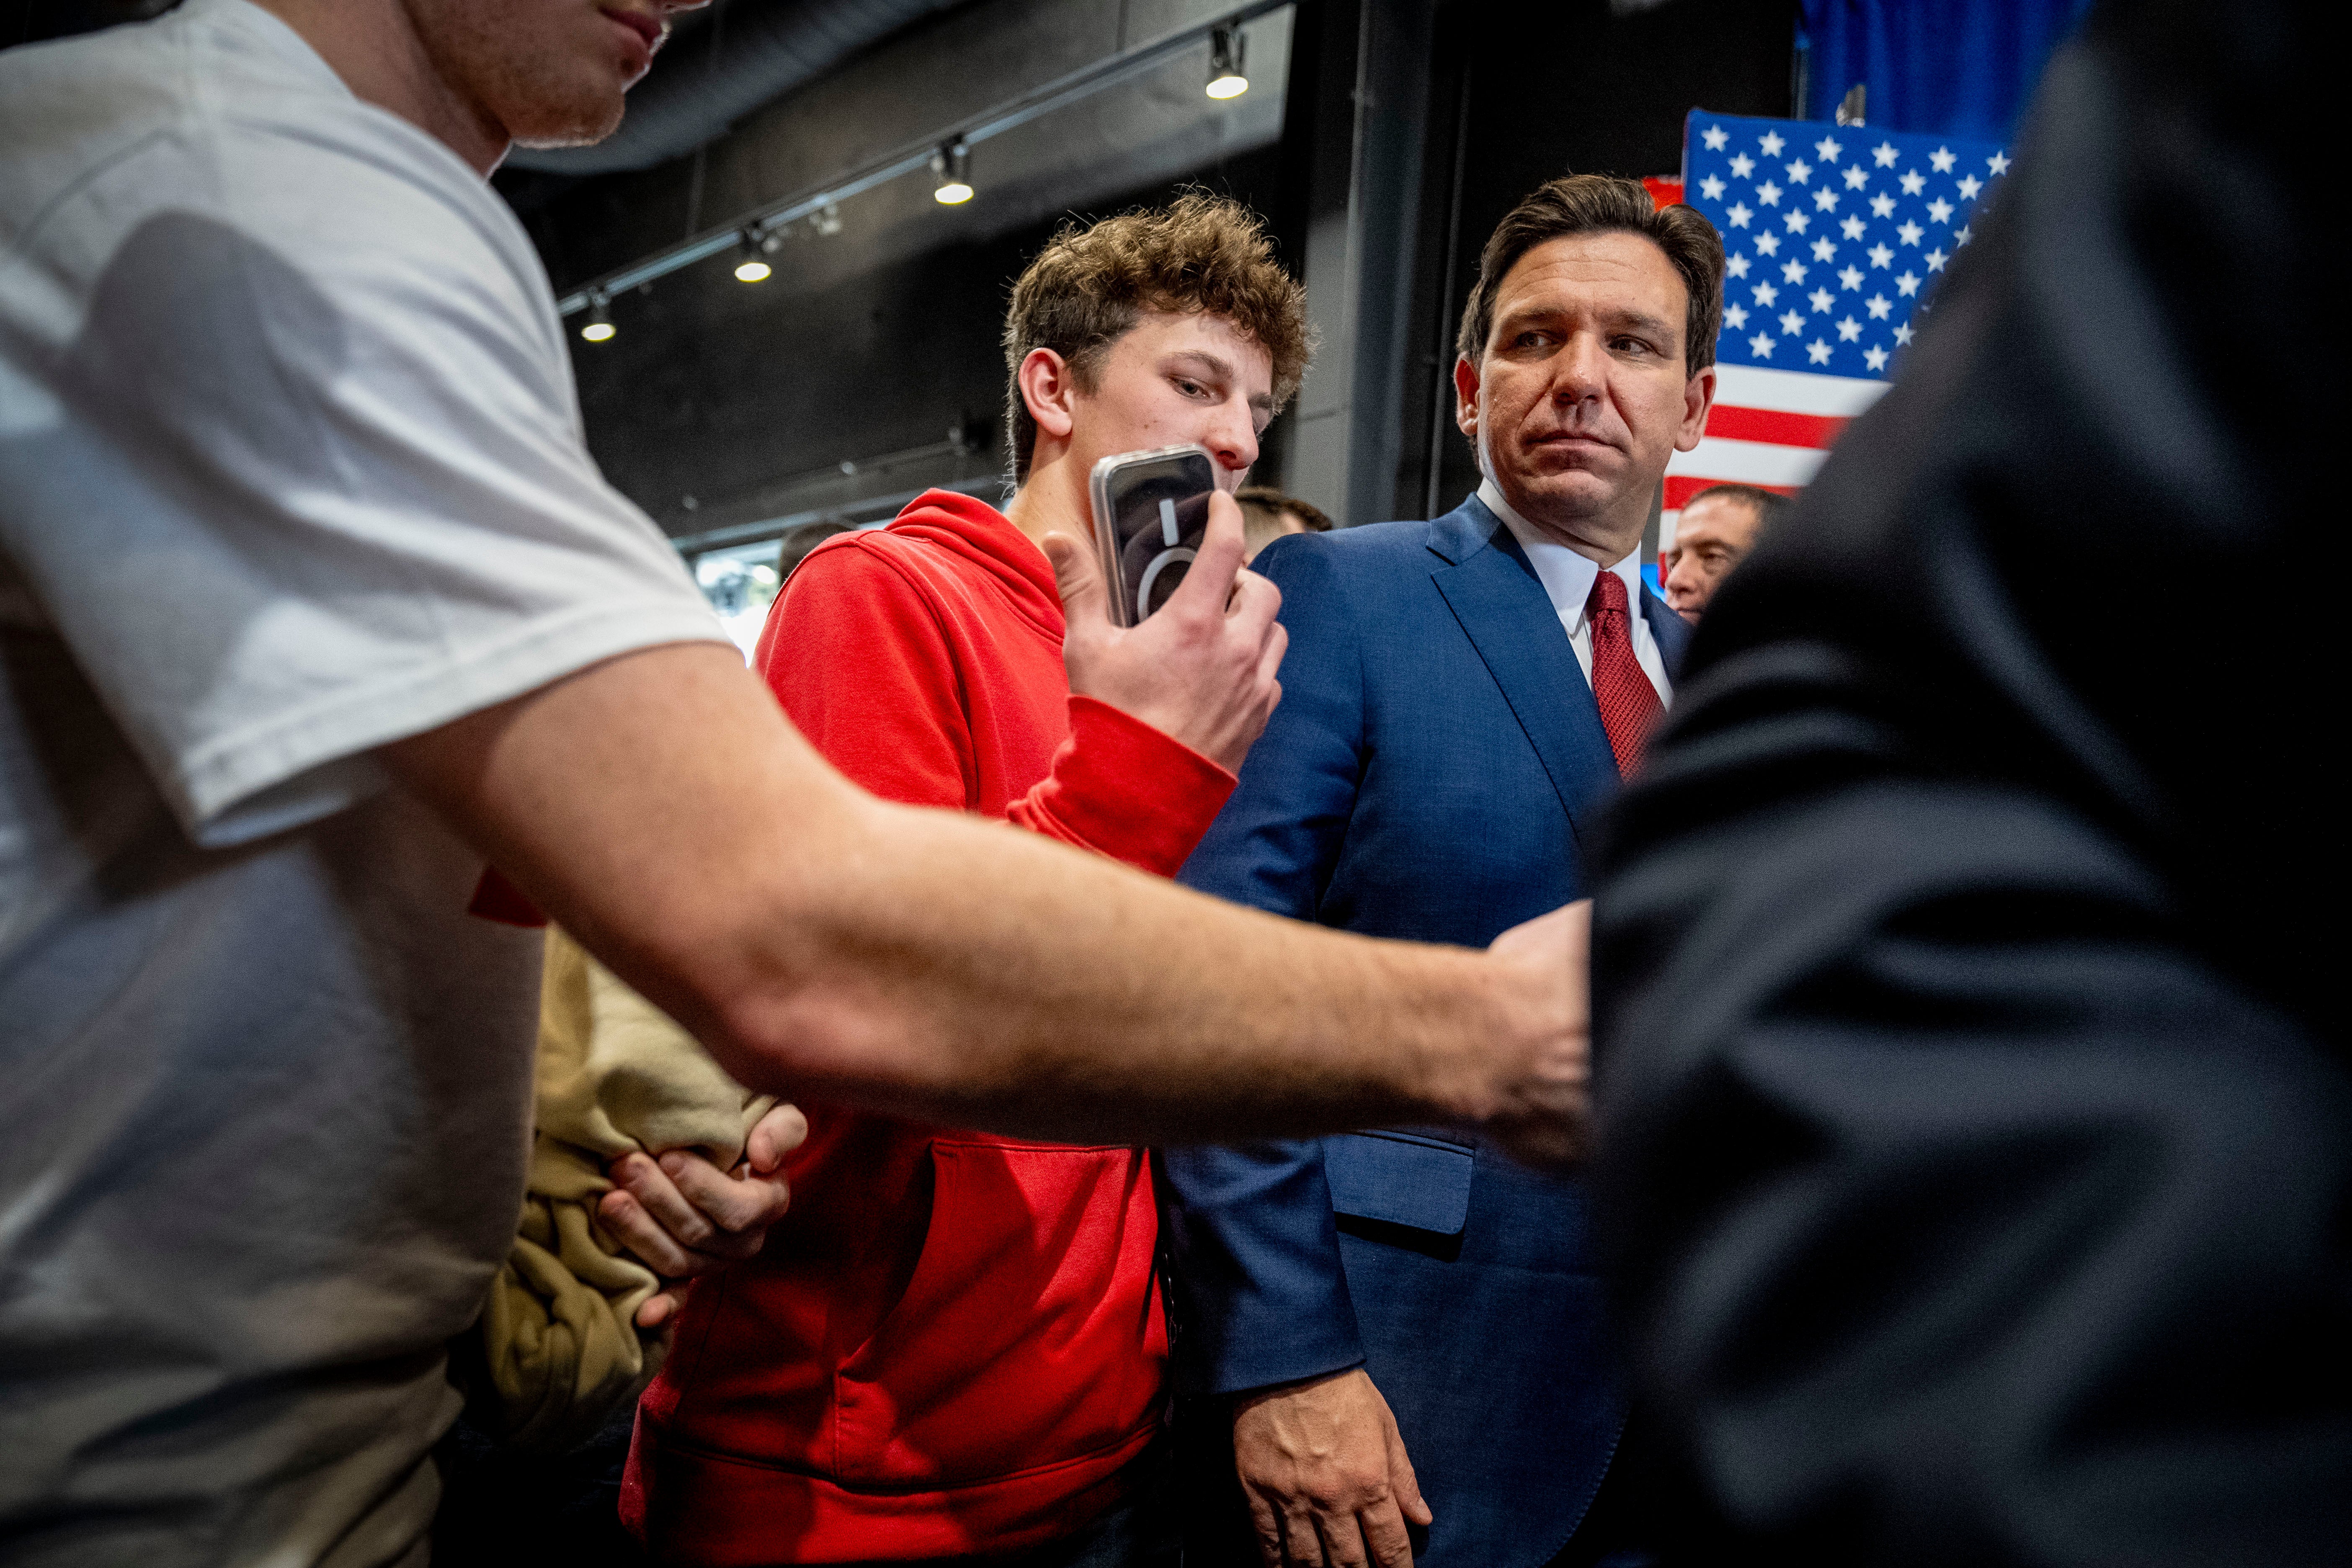 DeSantis survived only the first round of the GOP primary and caucus cycle